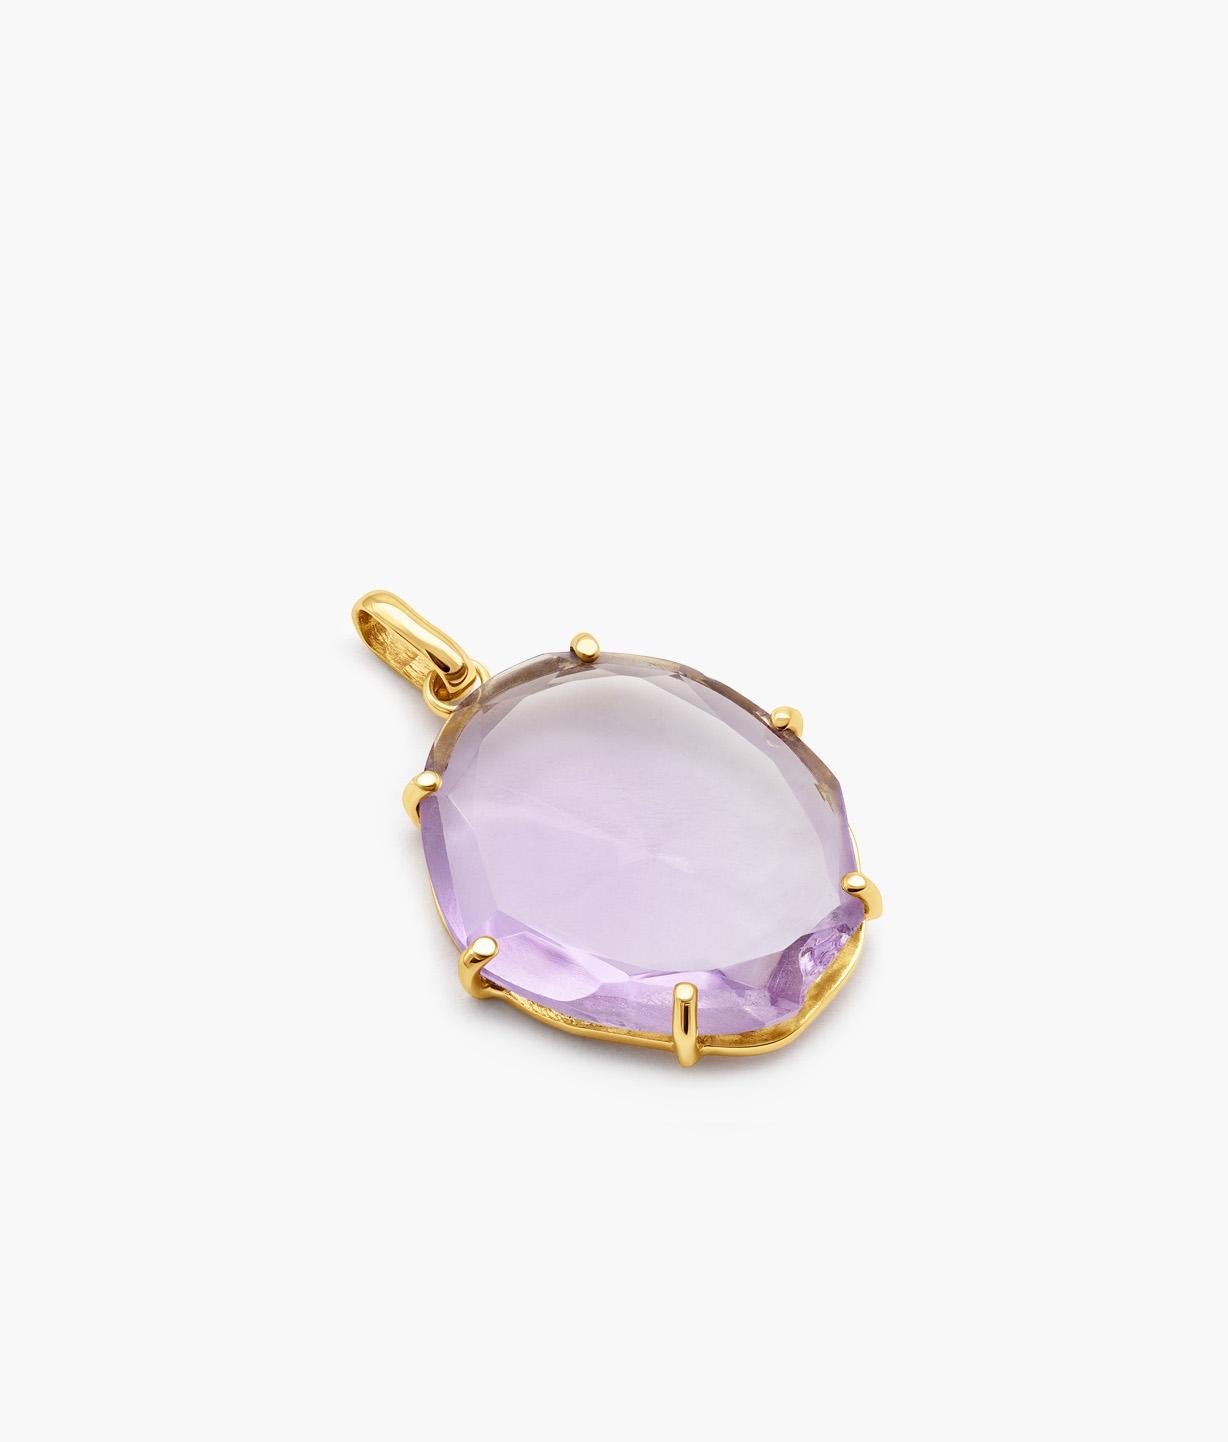 One-of-a-kind amethyst charm. Hand-made assembled on a 14-karat gold frame and recovered from our broken gems archives.

This pendant celebrates the beauty in imperfection.

Gemstones: Amethyst / Dimensions: 21 x 19 mm / SUOT G585 engraving.